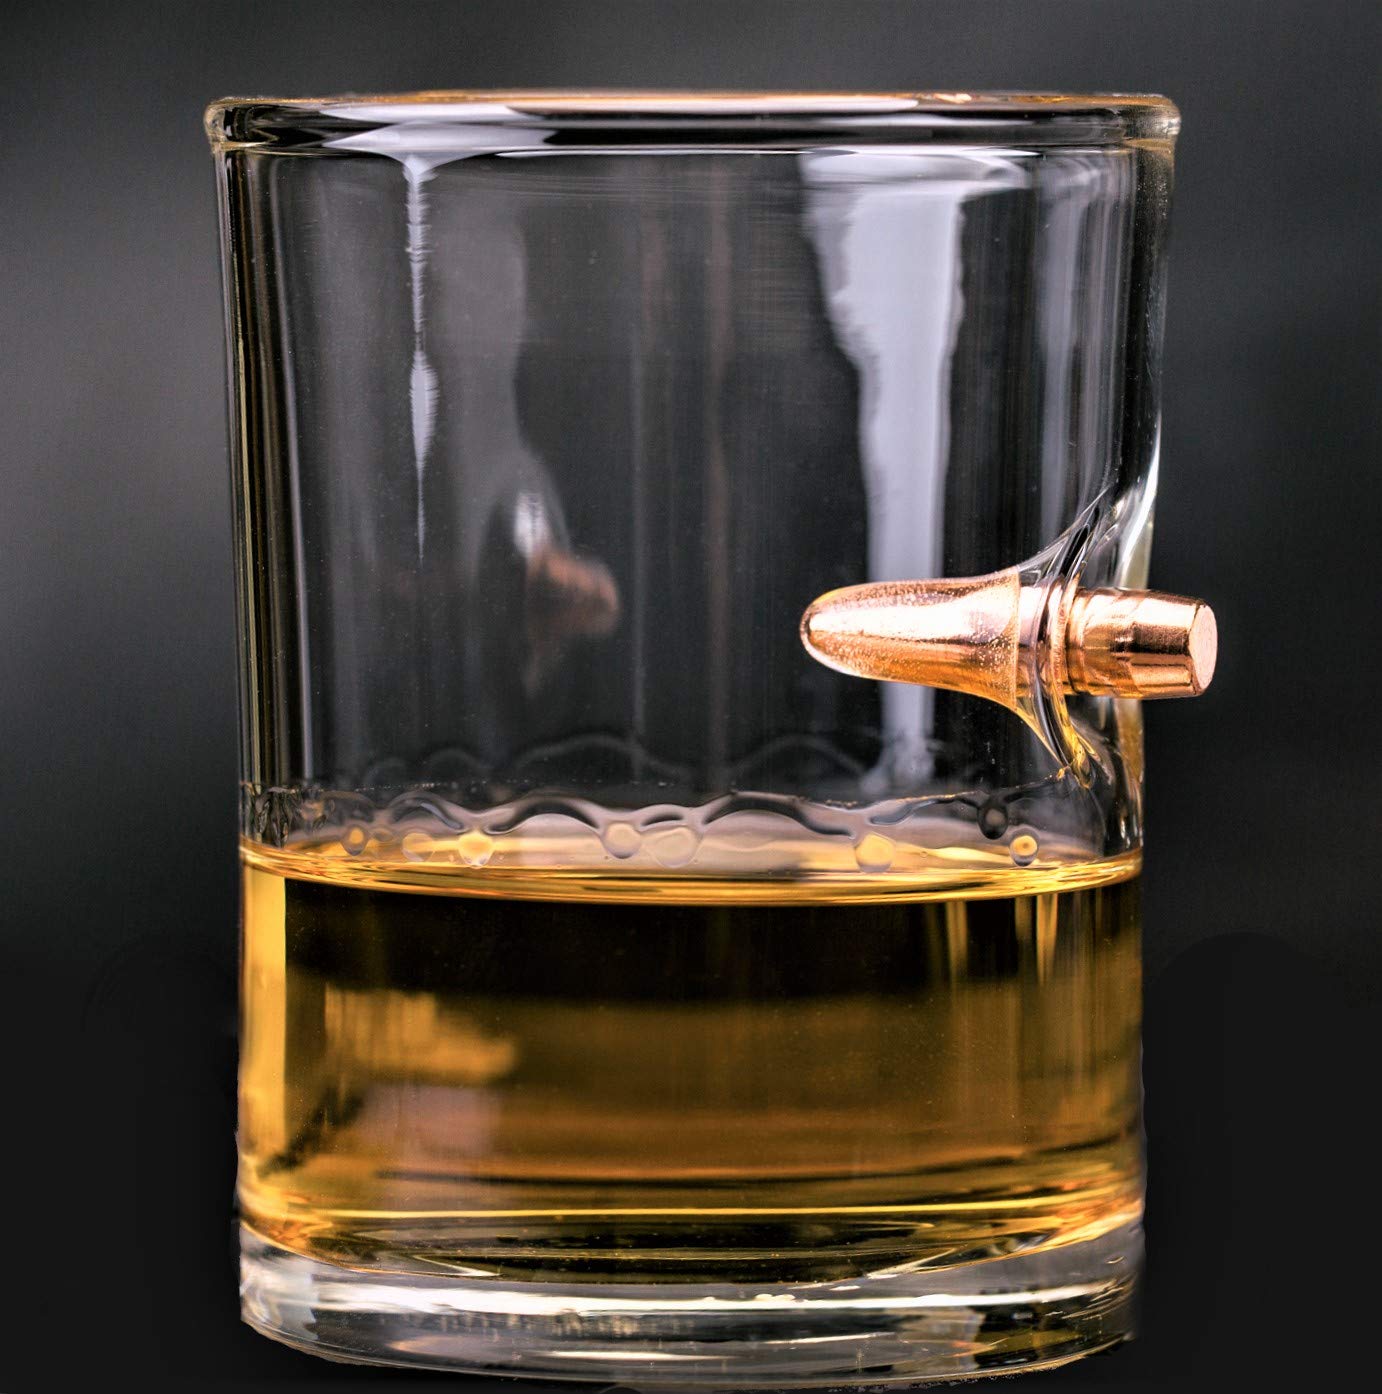 Best Price for Whisky Stone Gift - 308 Real Solid Copper Projectile Hand Blown Old Fashioned Whiskey Rocks Glass Set of 2 – Shunstone detail pictures